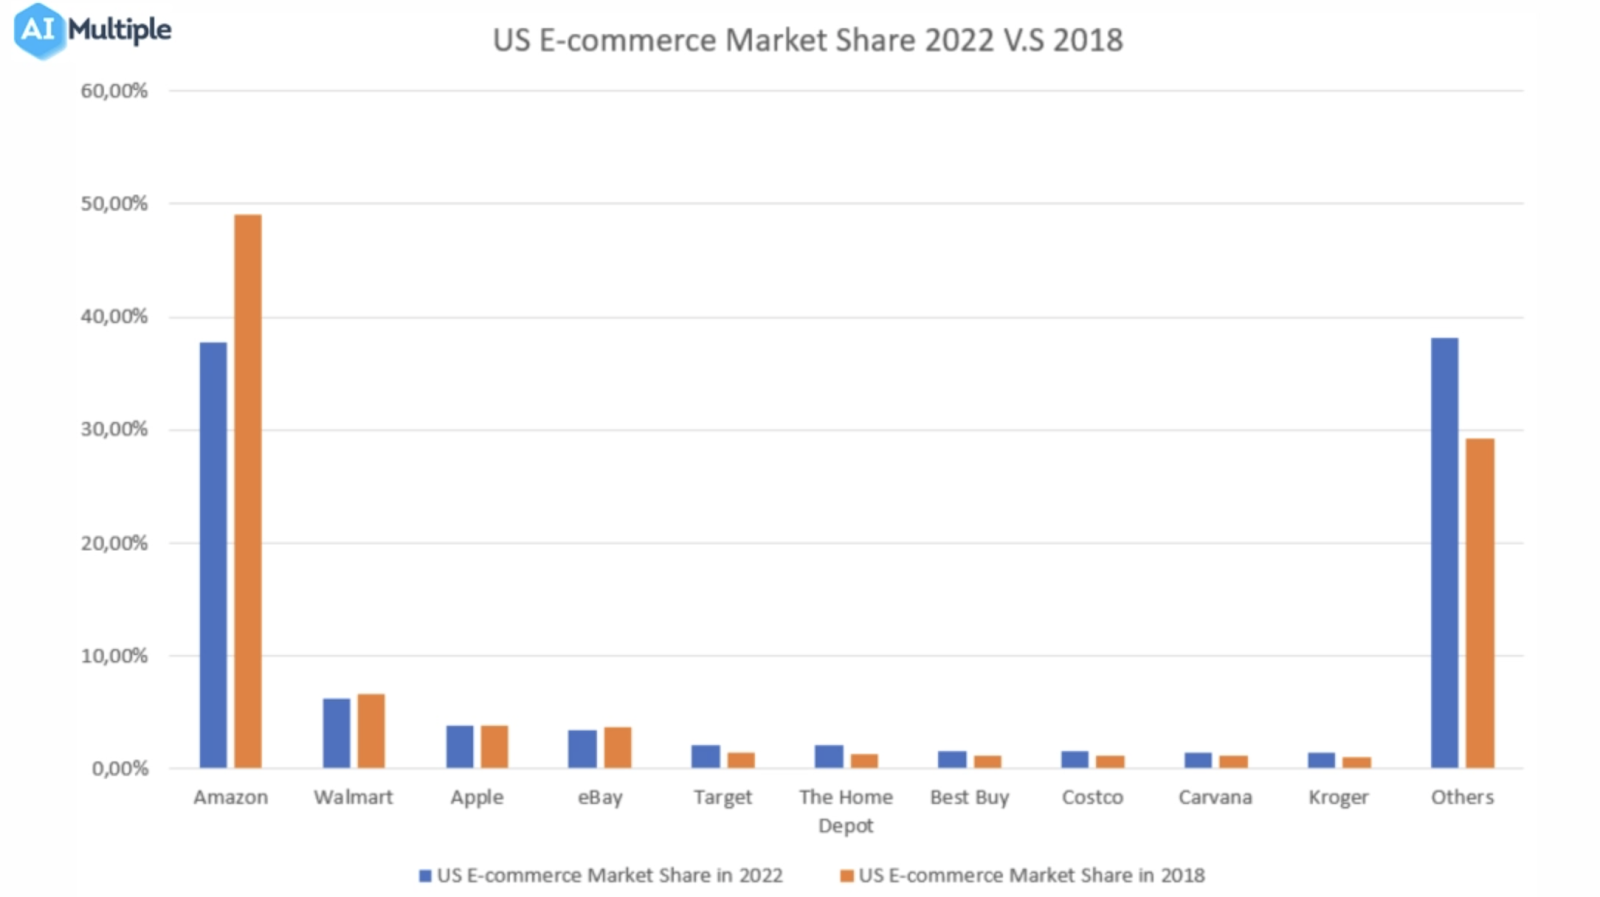 US ecommerce market share growth for Amazon and others